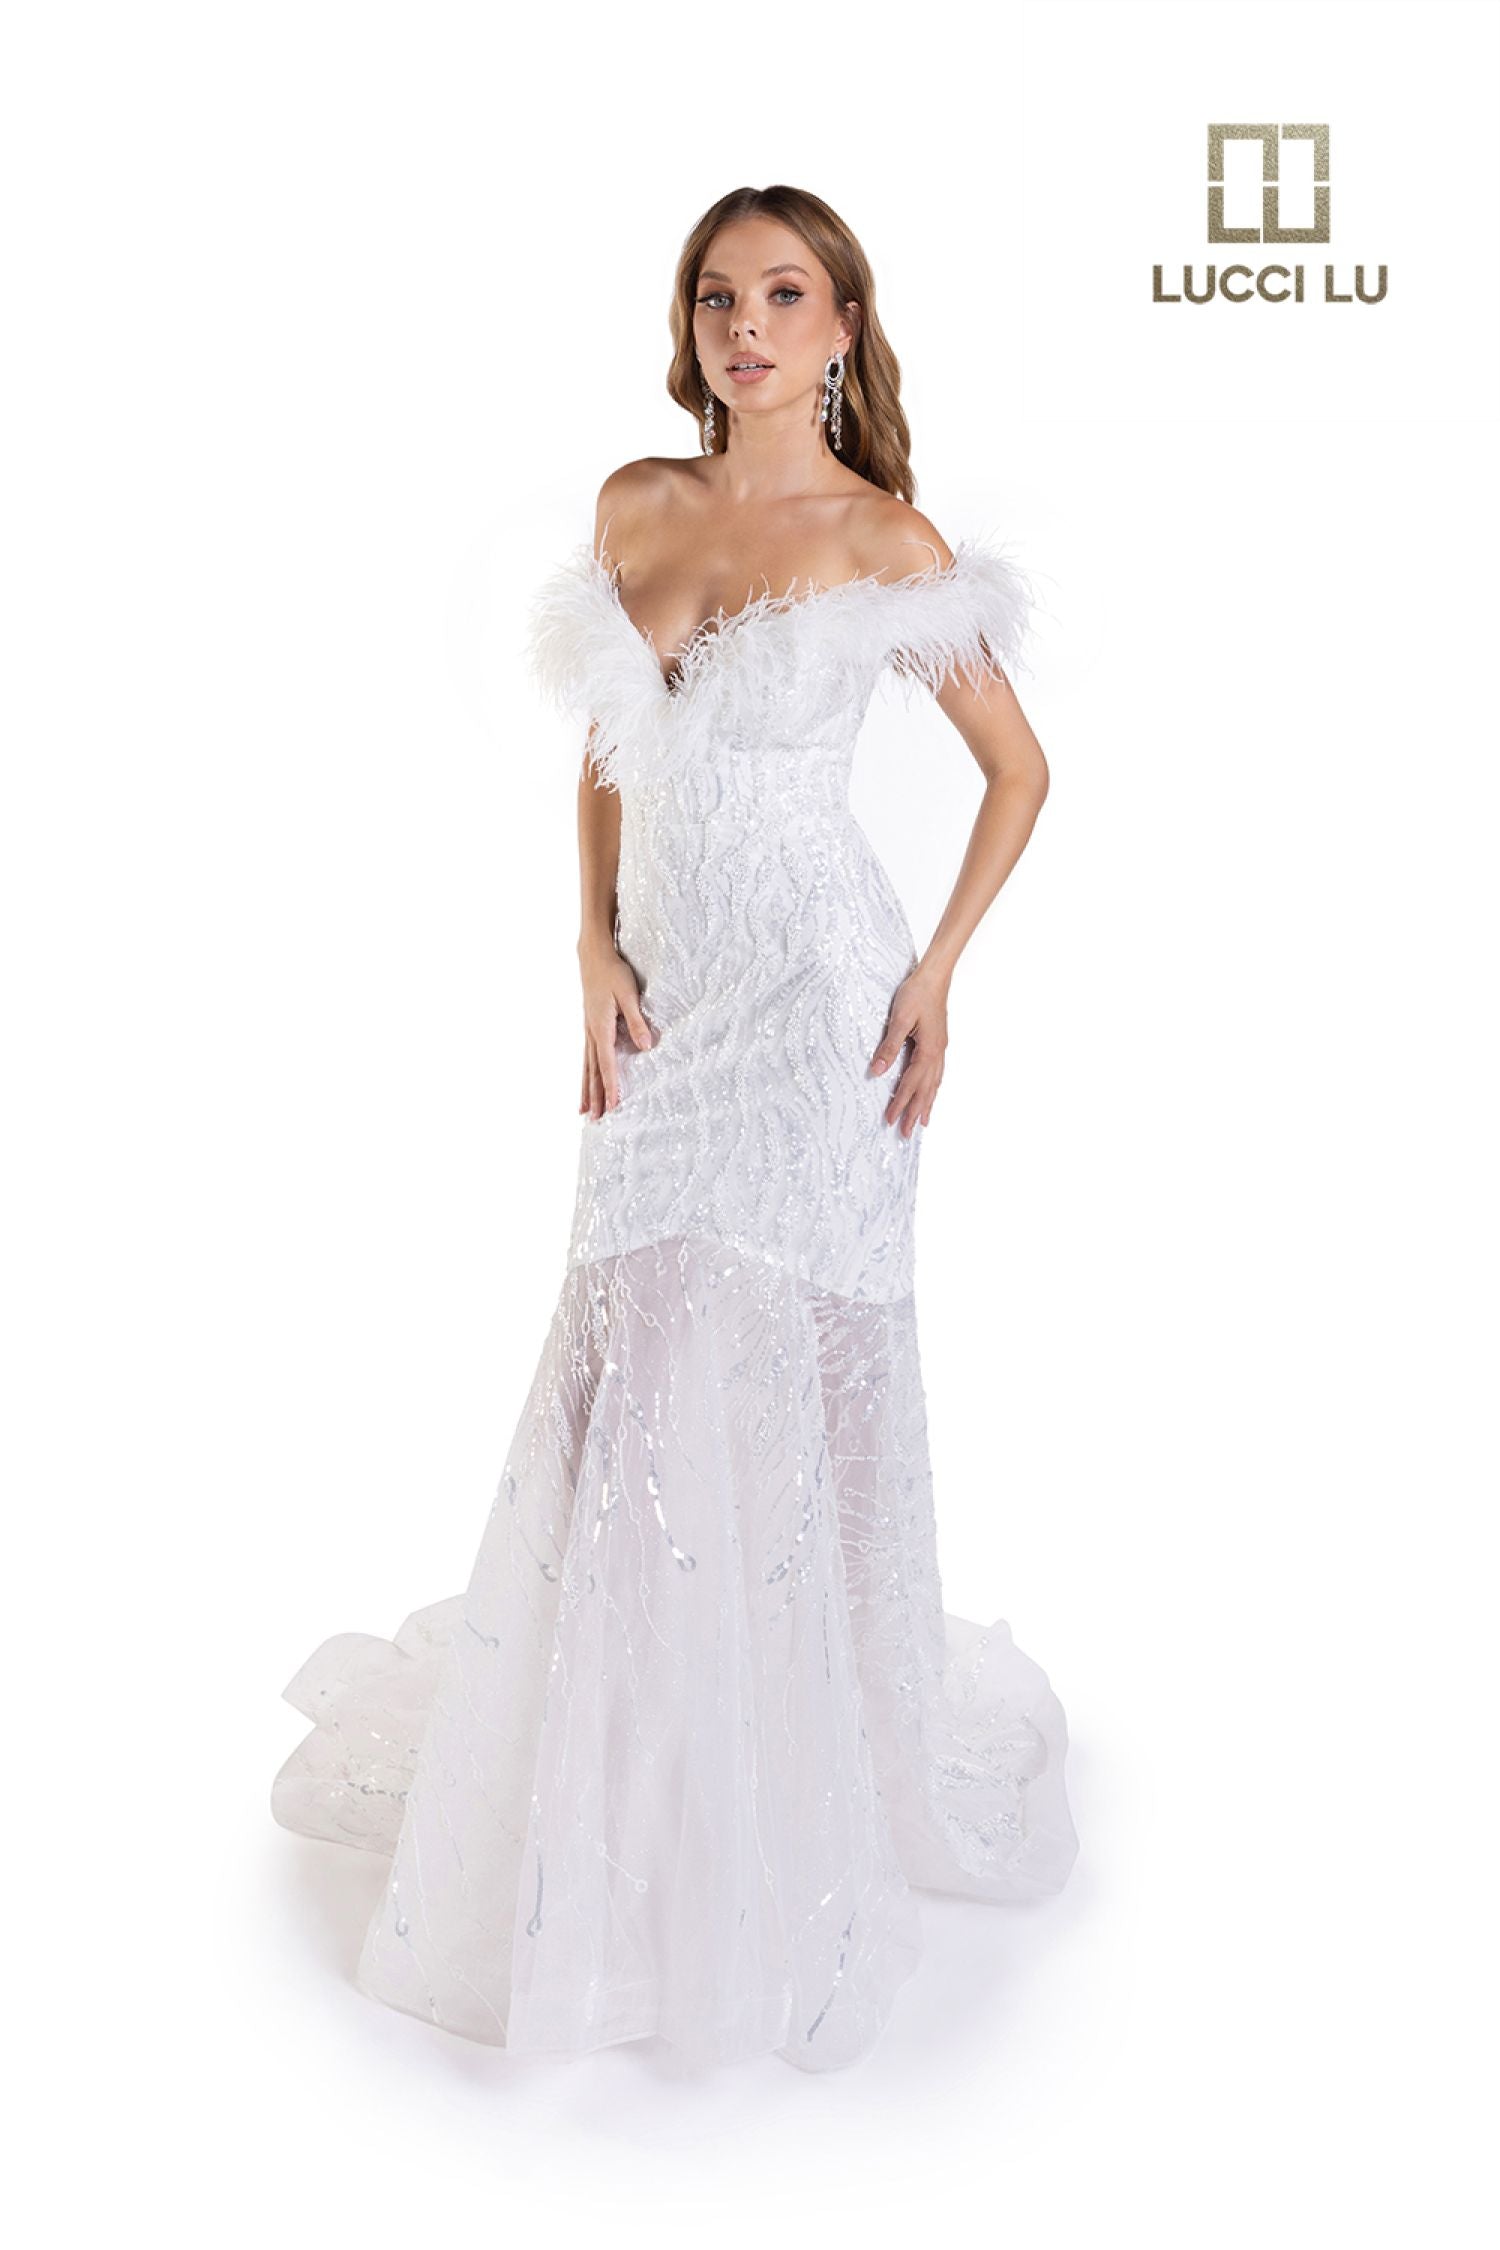 Lucci Lu C8051 Long Beaded sheer Shimmer off the shoulder Feather Mermaid Prom Dress Pageant Gown Wedding  or Bridal  Sizes: 4-20  Colors: White 